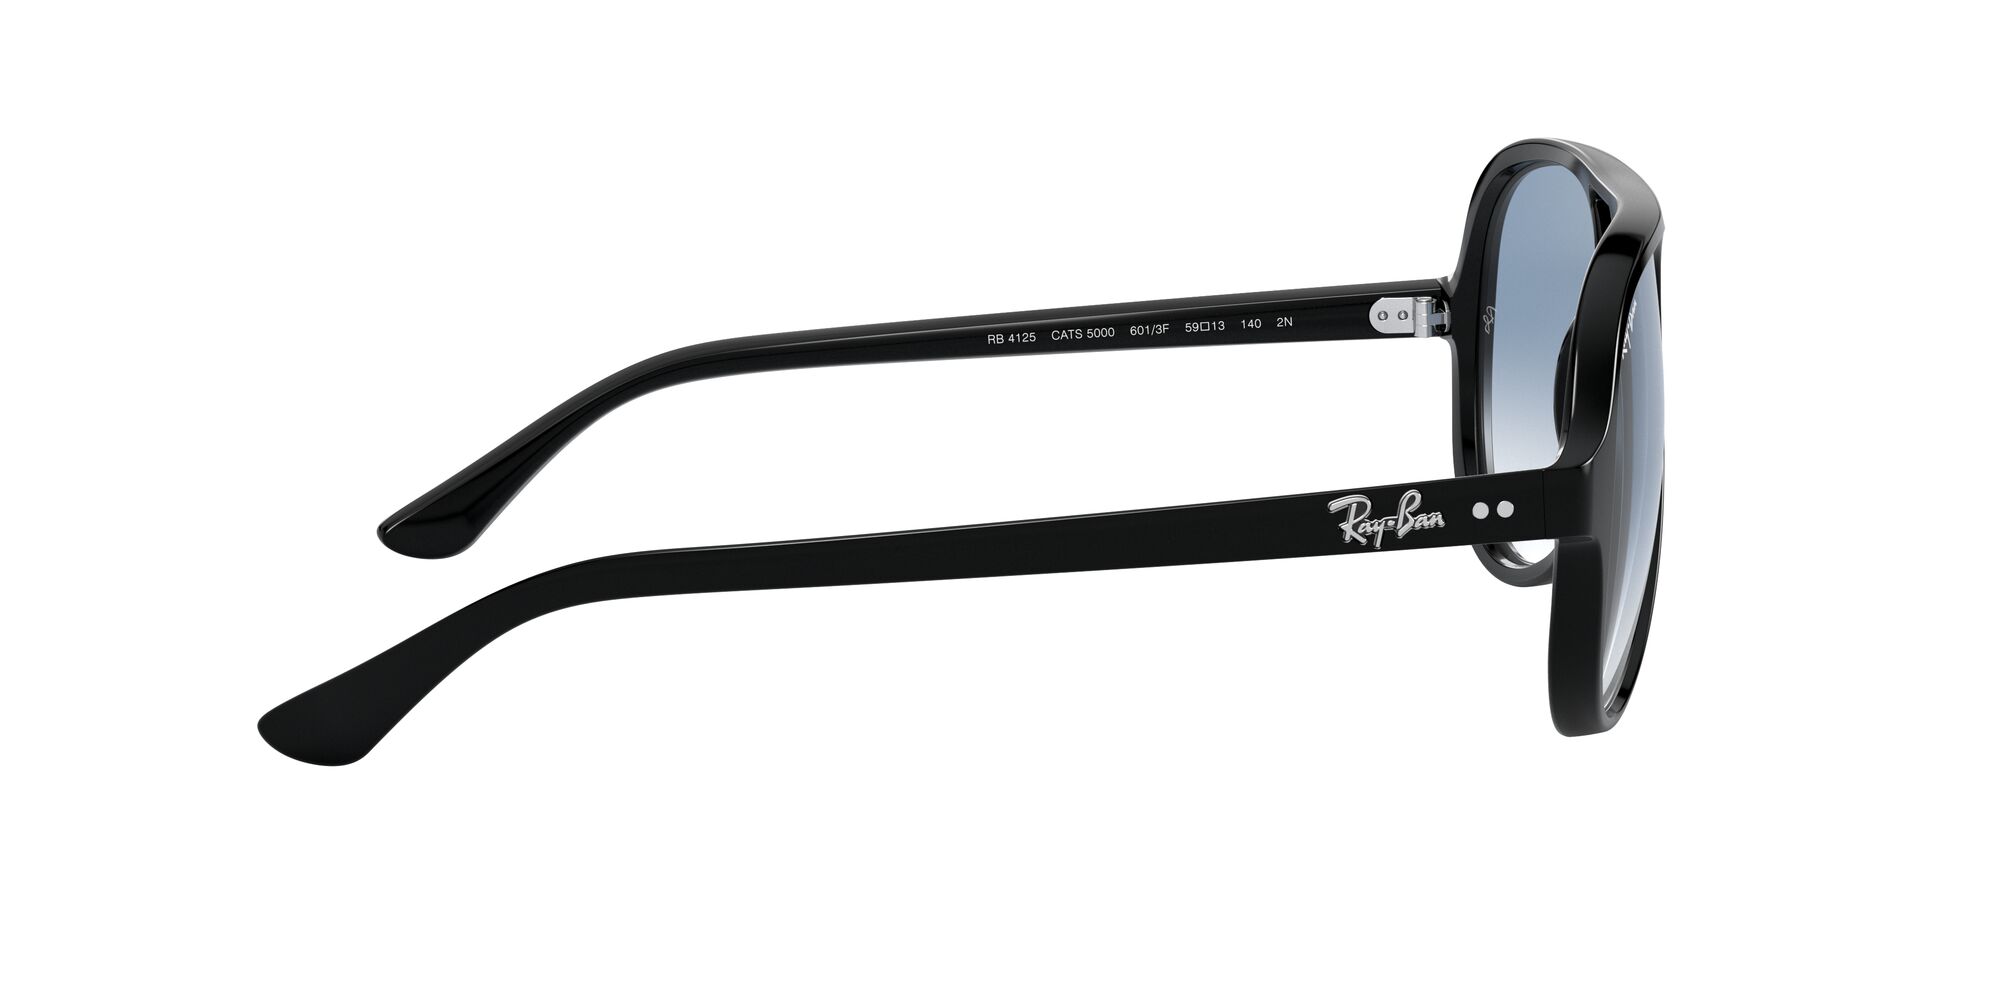 Ray-Ban RB4125 Cats 5000 Sunglasses - image 10 of 12